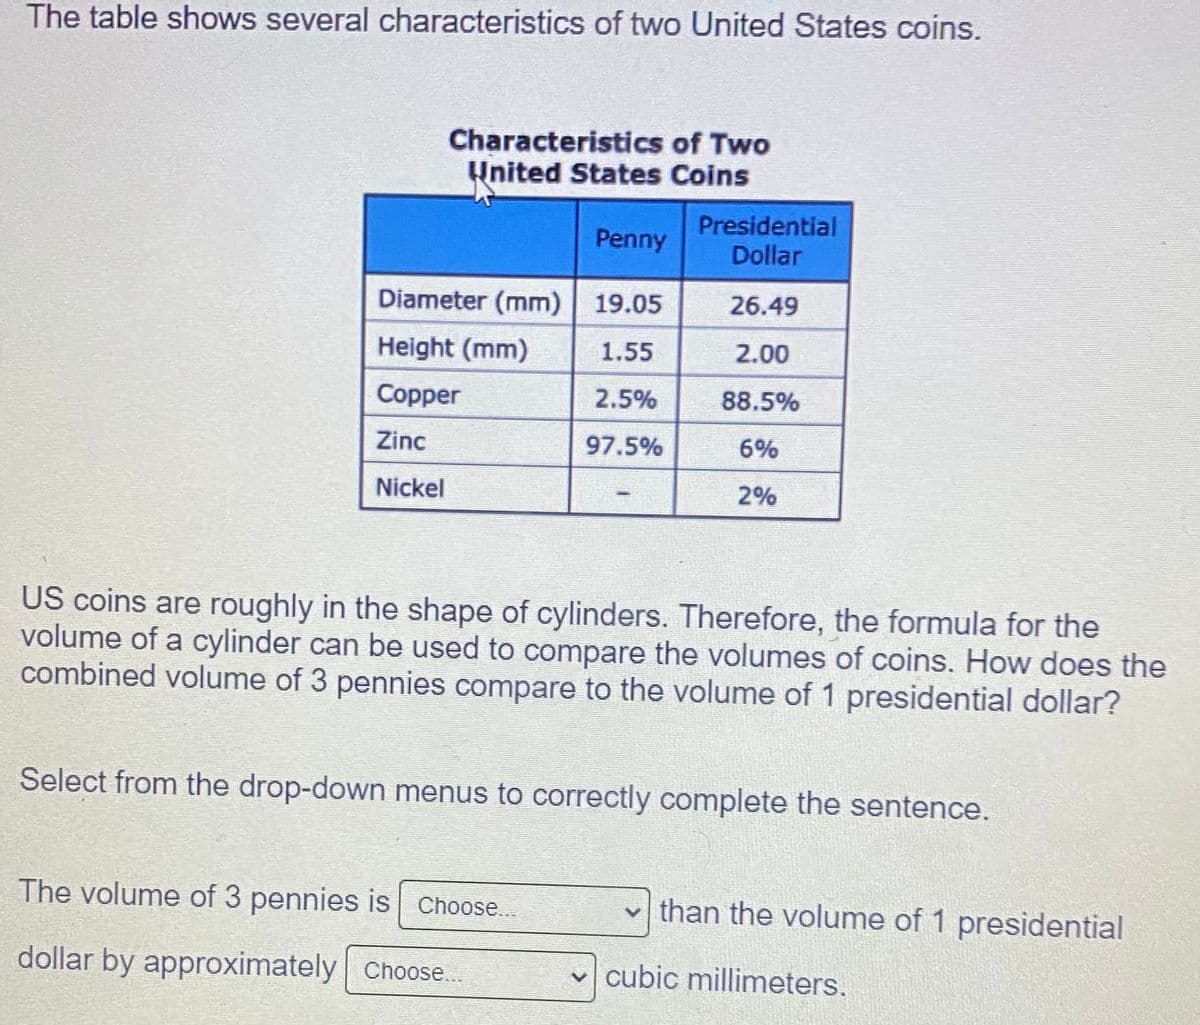 The table shows several characteristics of two United States coins.
Characteristics of Two
Hnited States Coins
Presidential
Dollar
Penny
Diameter (mm) 19.05
26.49
Height (mm)
1.55
2.00
Copper
2.5%
88.5%
Zinc
97.5%
6%
Nickel
2%
US coins are roughly in the shape of cylinders. Therefore, the formula for the
volume of a cylinder can be used to compare the volumes of coins. How does the
combined volume of 3 pennies compare to the volume of 1 presidential dollar?
Select from the drop-down menus to correctly complete the sentence.
The volume of 3 pennies is Choose..
than the volume of 1 presidential
dollar by approximately Choose.
cubic millimeters.
